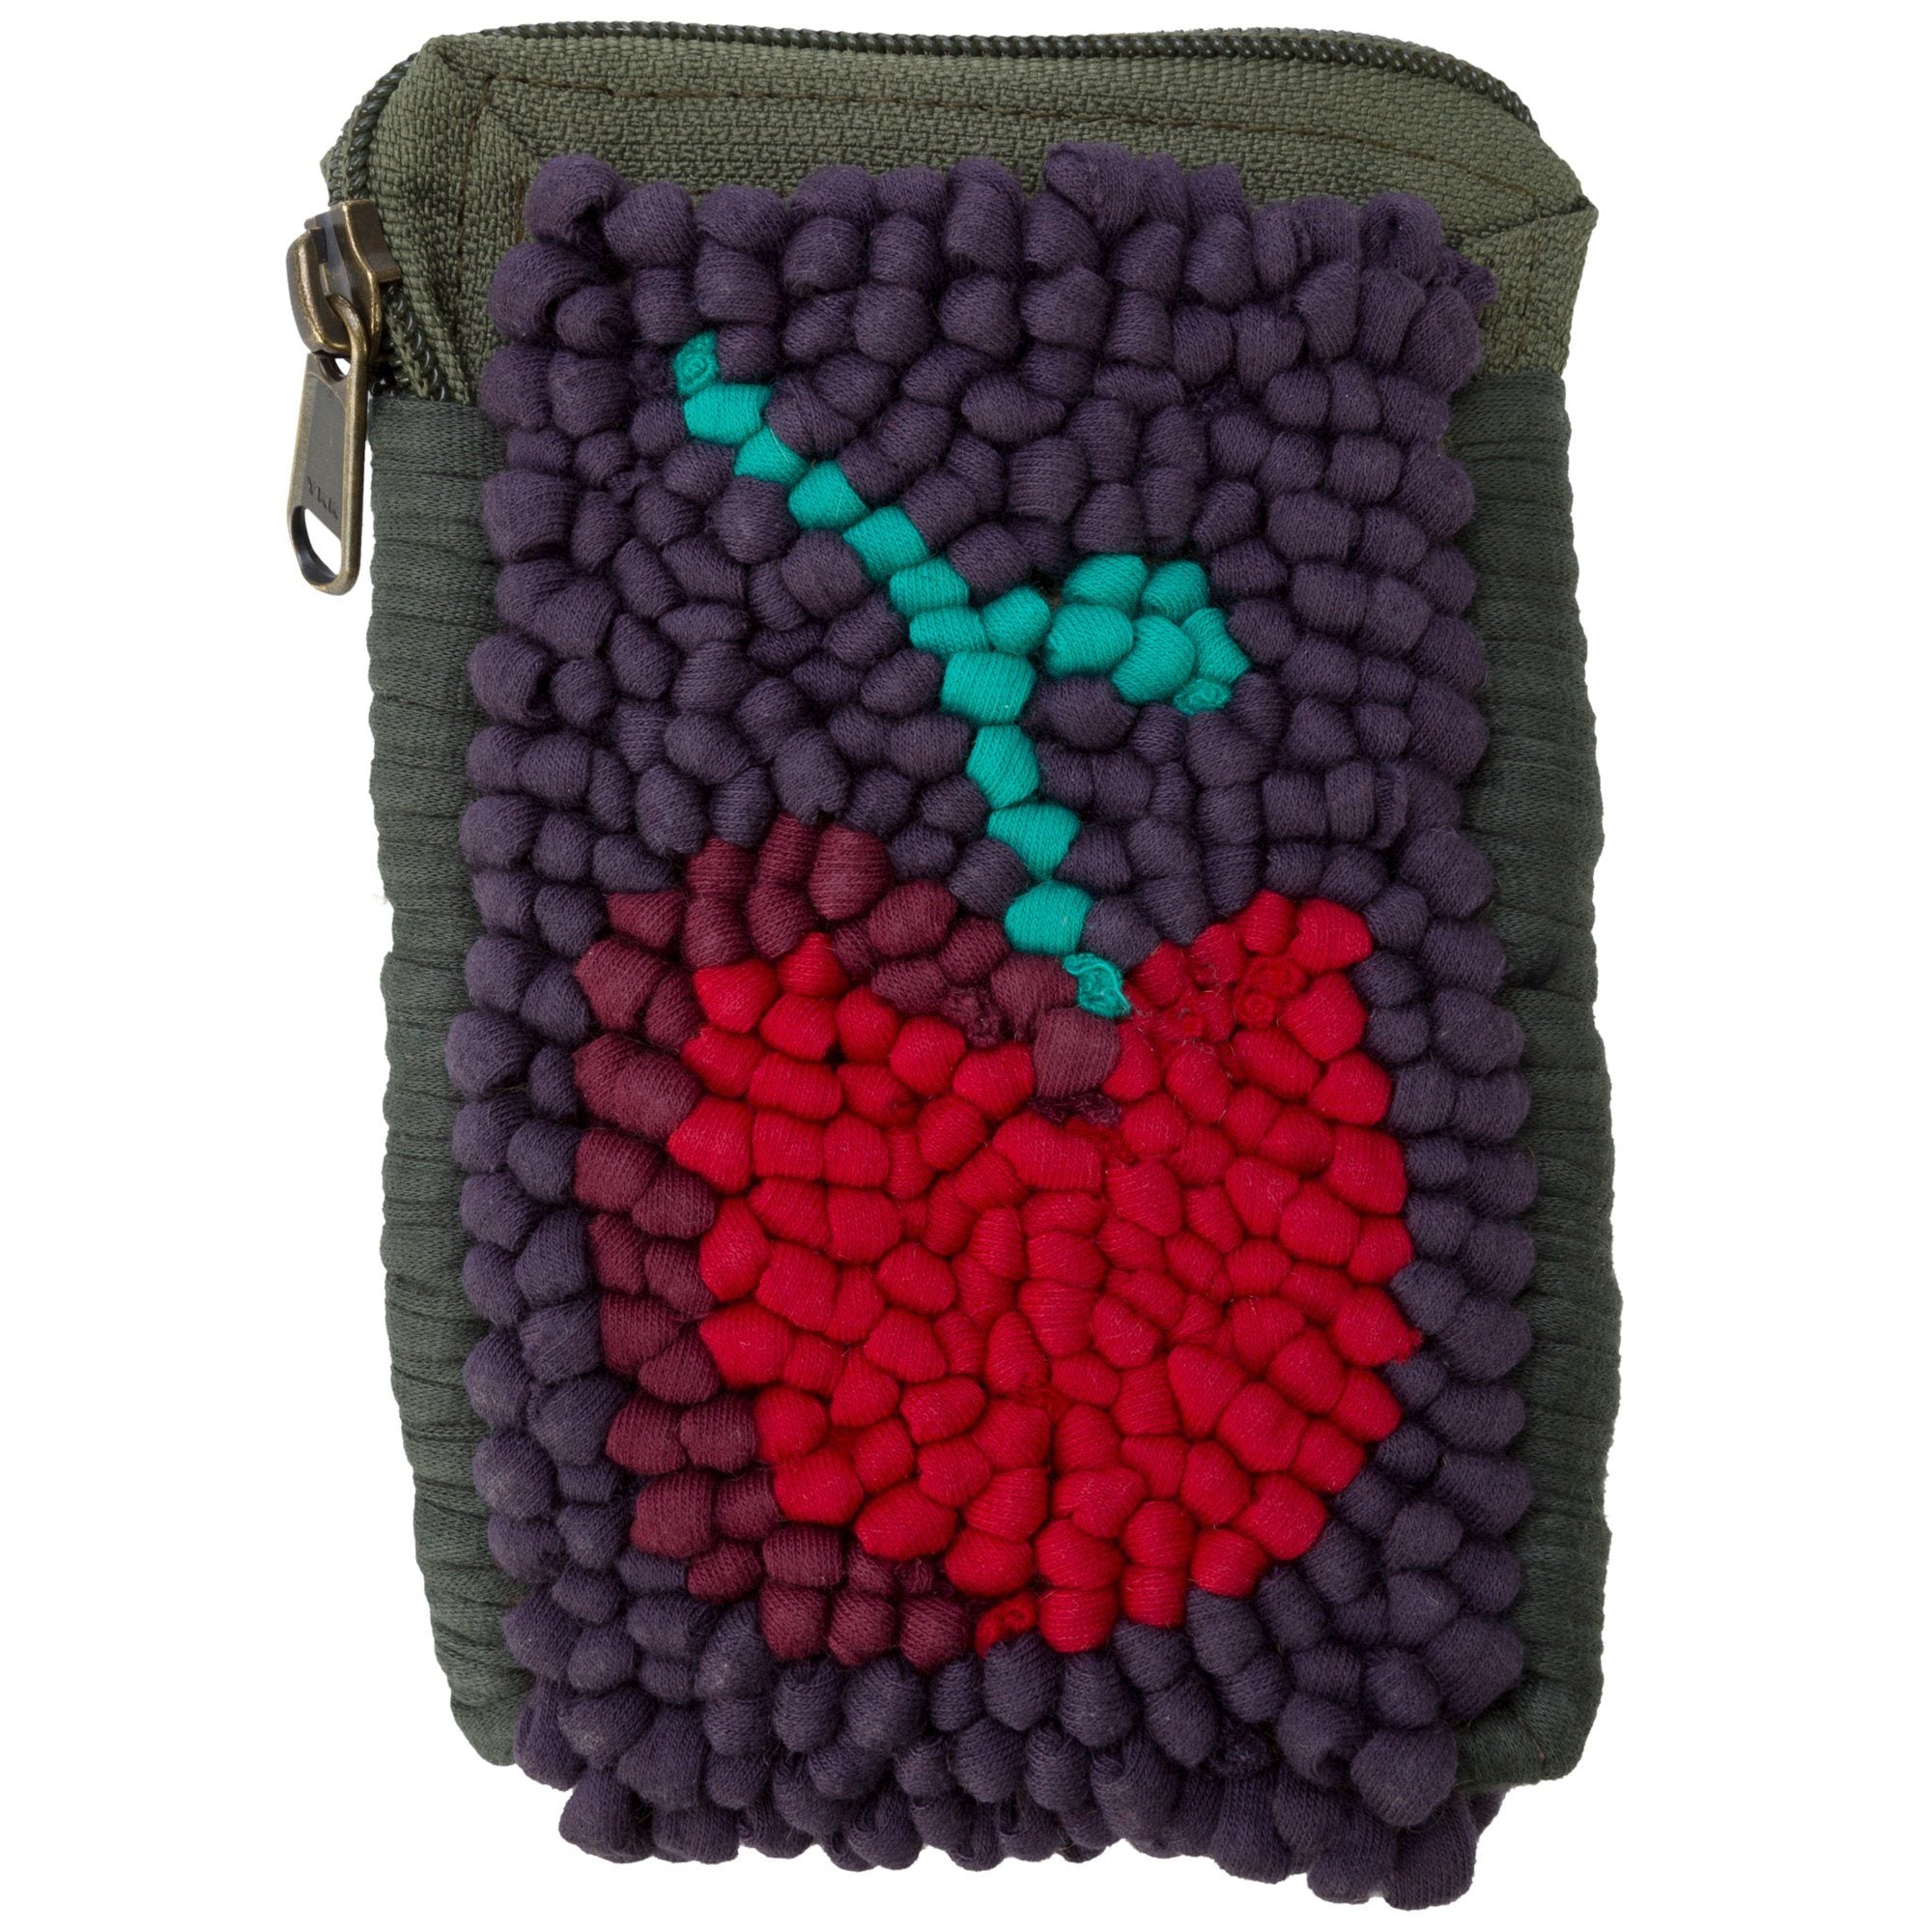 Mielie Gadget Pouch - Poppy - Red/Blue